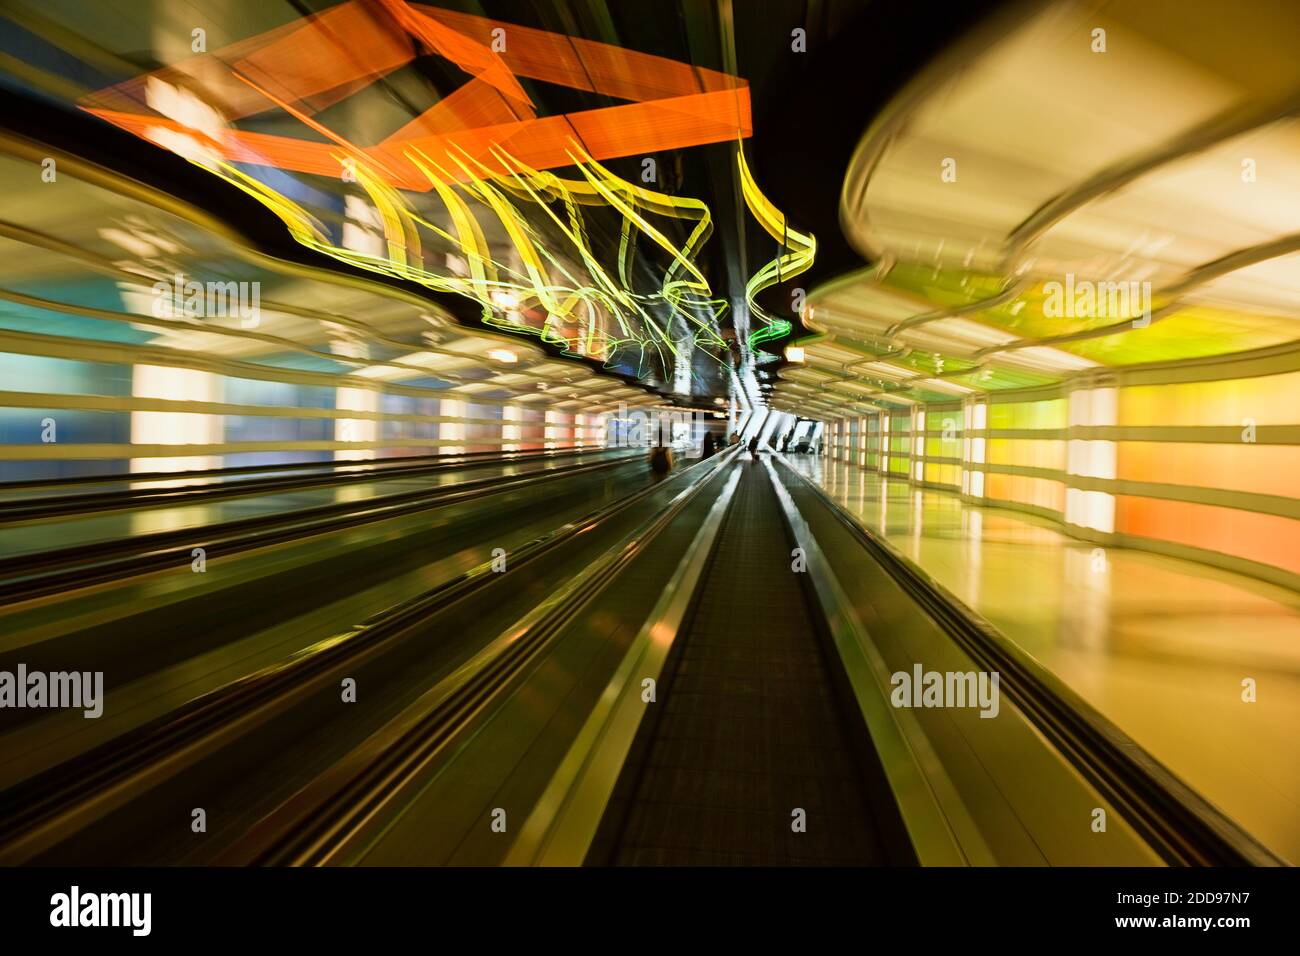 Laufband im Tunnel United Airlines Terminal, O' Hare International Airport, Chicago, Illinois, USA Stockfoto